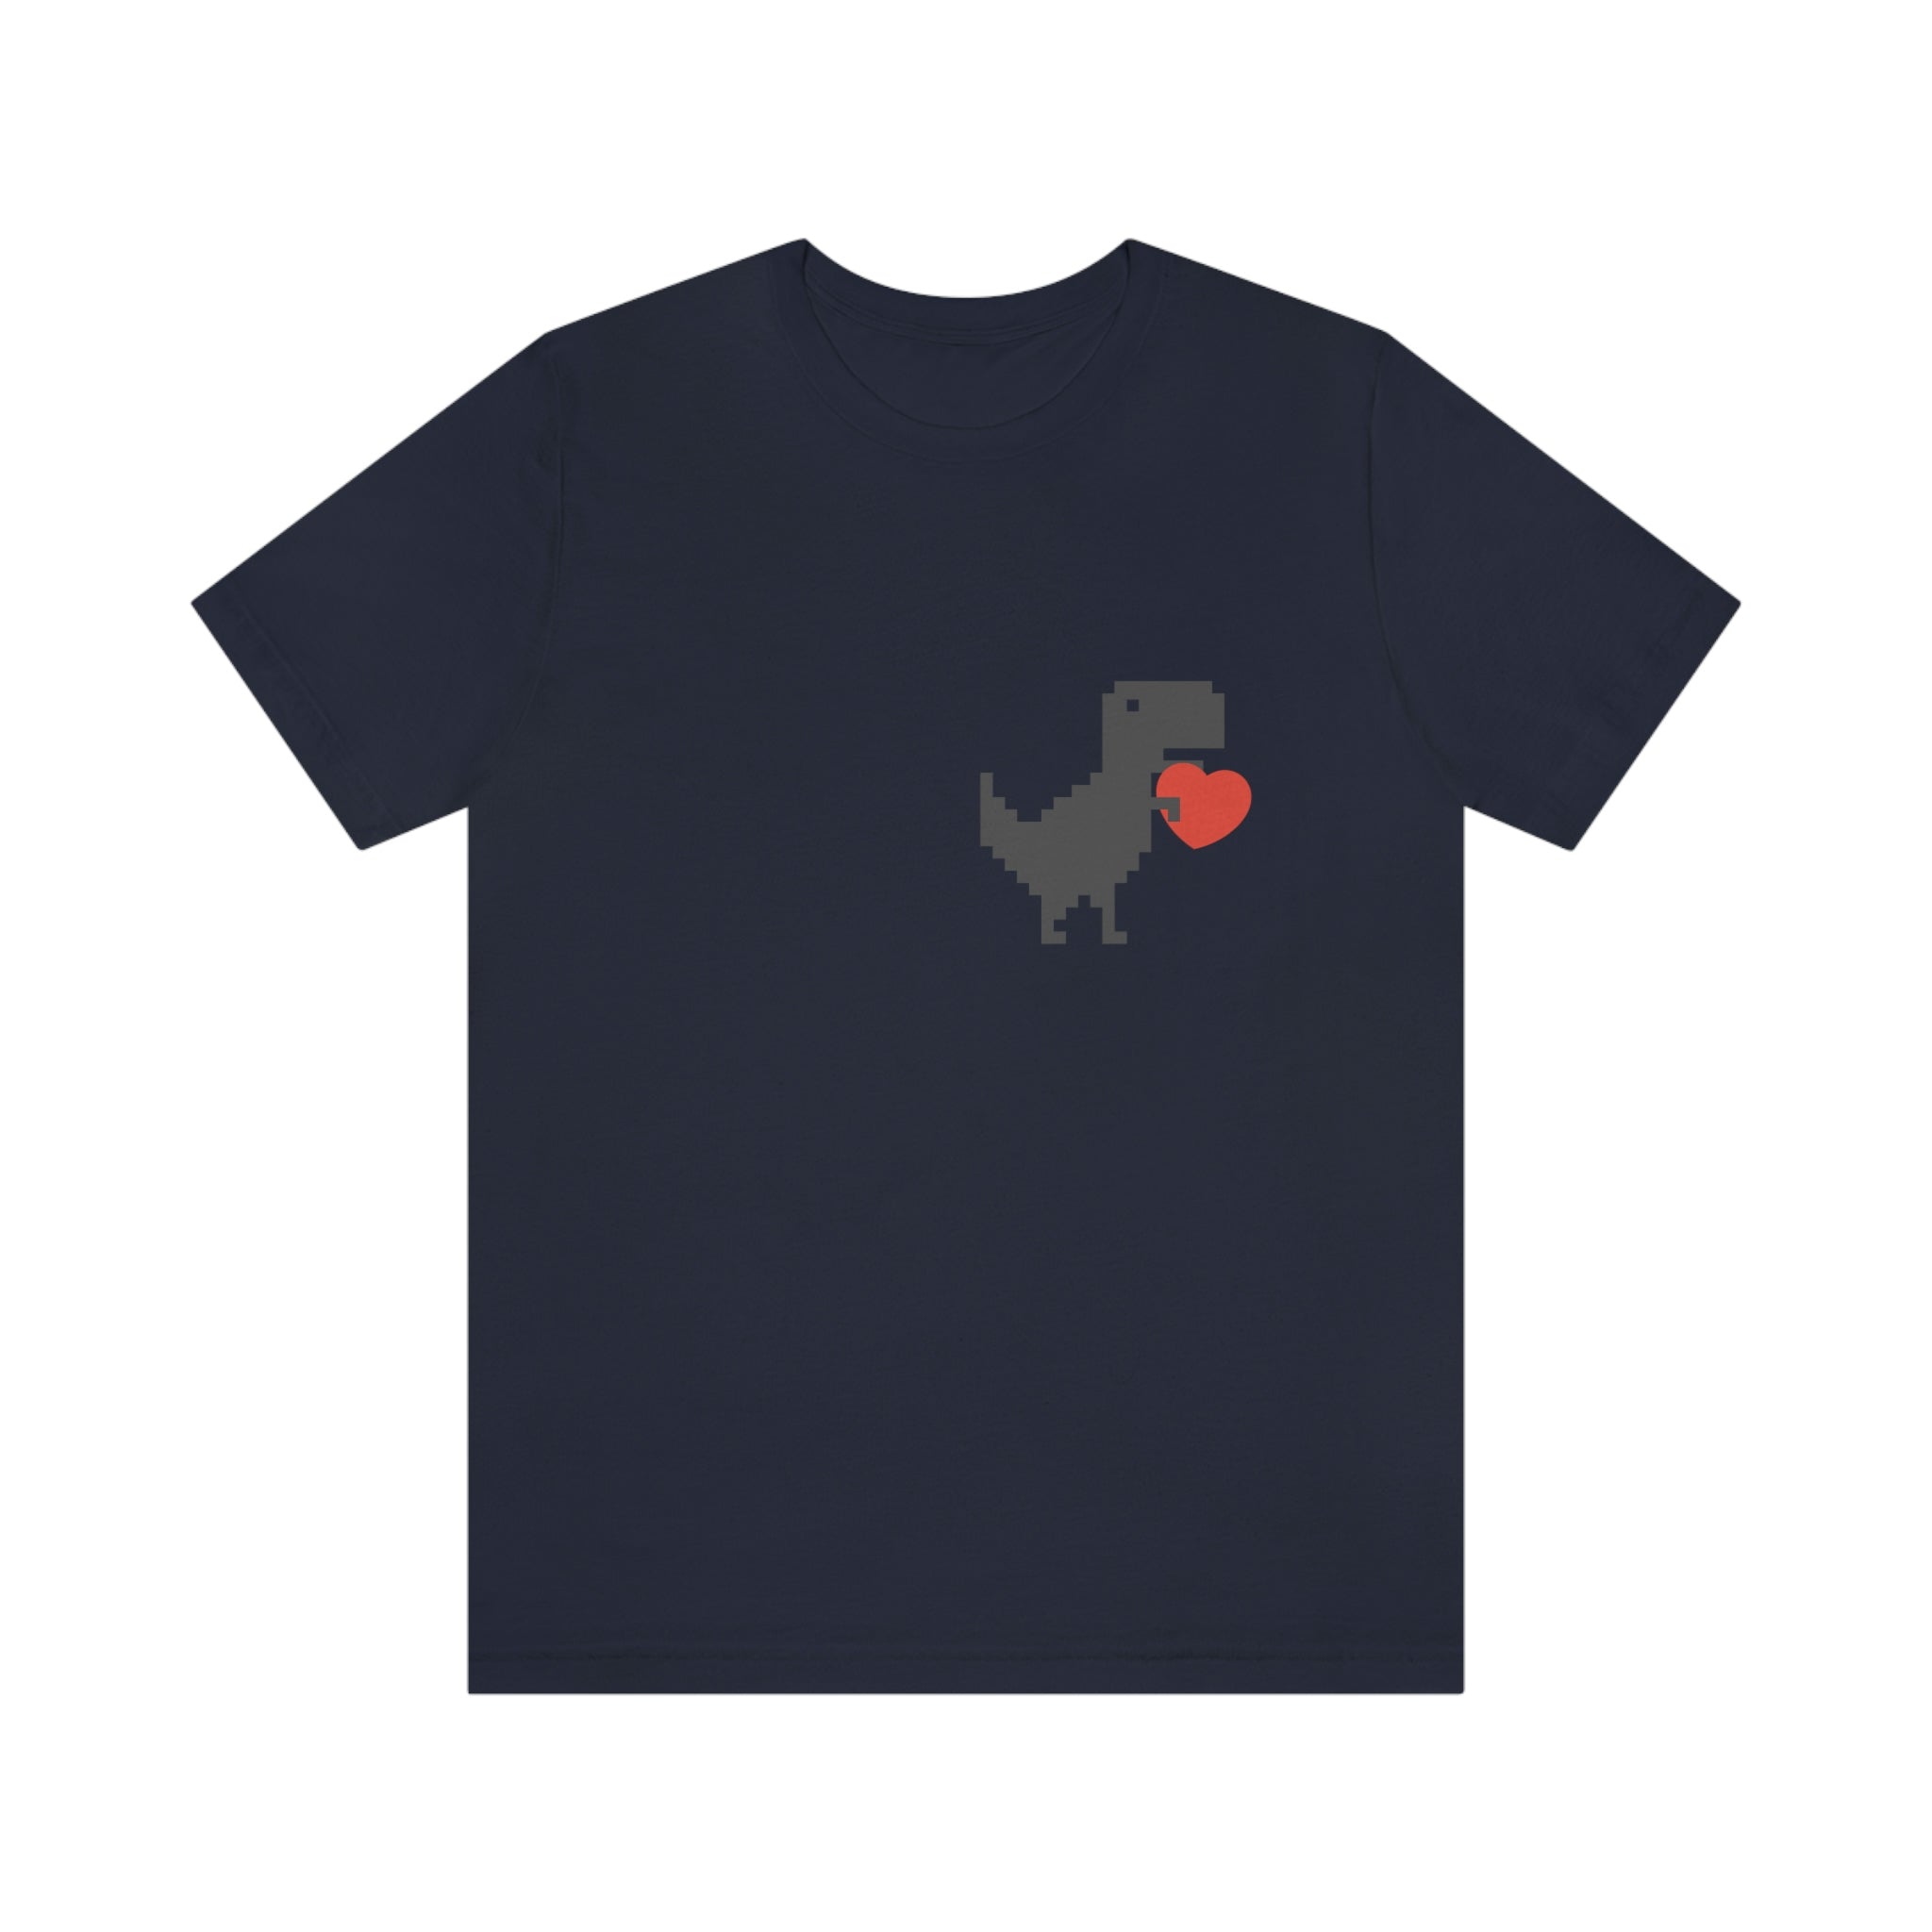 Larry the Dino Loves You! : Unisex 100% Cotton T-Shirt by Bella+Canvas